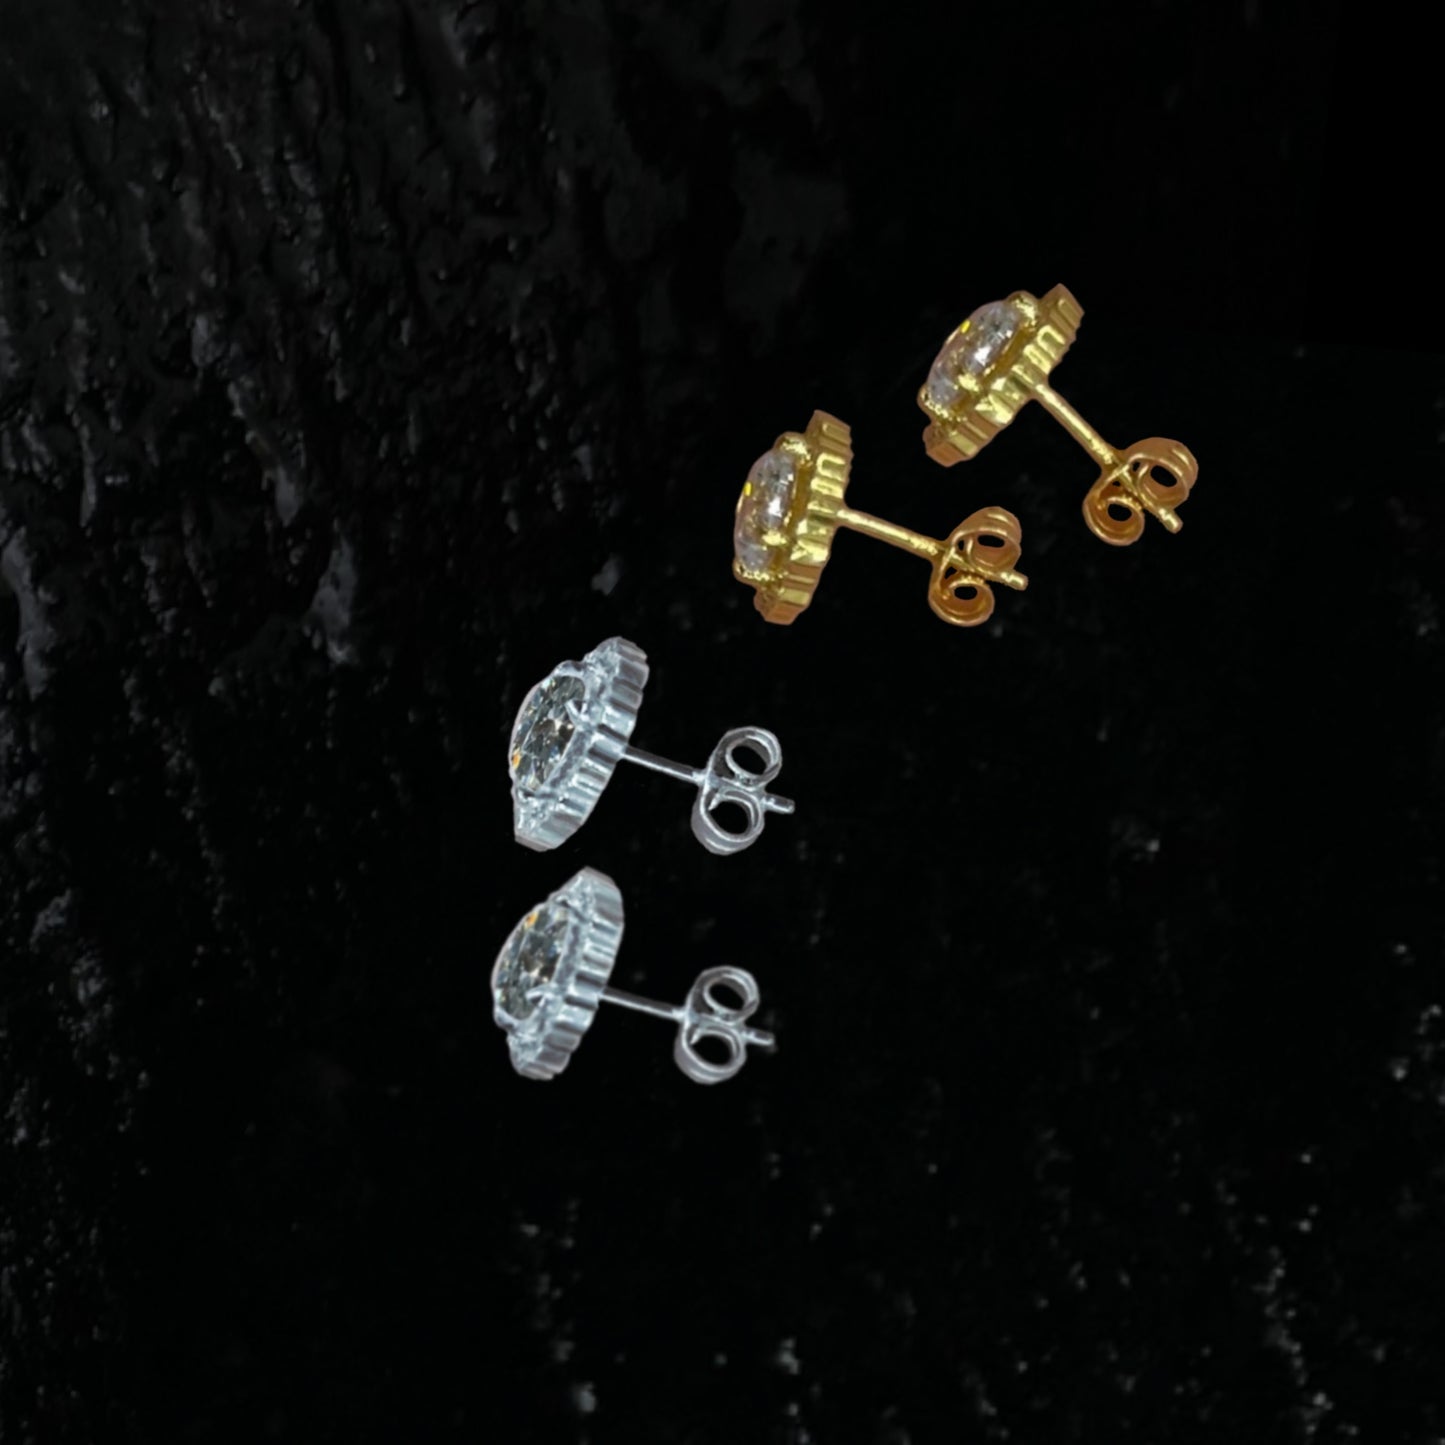 Molten Halo Solitare Studs | Sterling Silver, 18k Vermeil, 18k Yellow Gold with CZs, and 18k White Gold with CZs, 18k Gold with Diamonds, or 18k White Gold with Diamonds